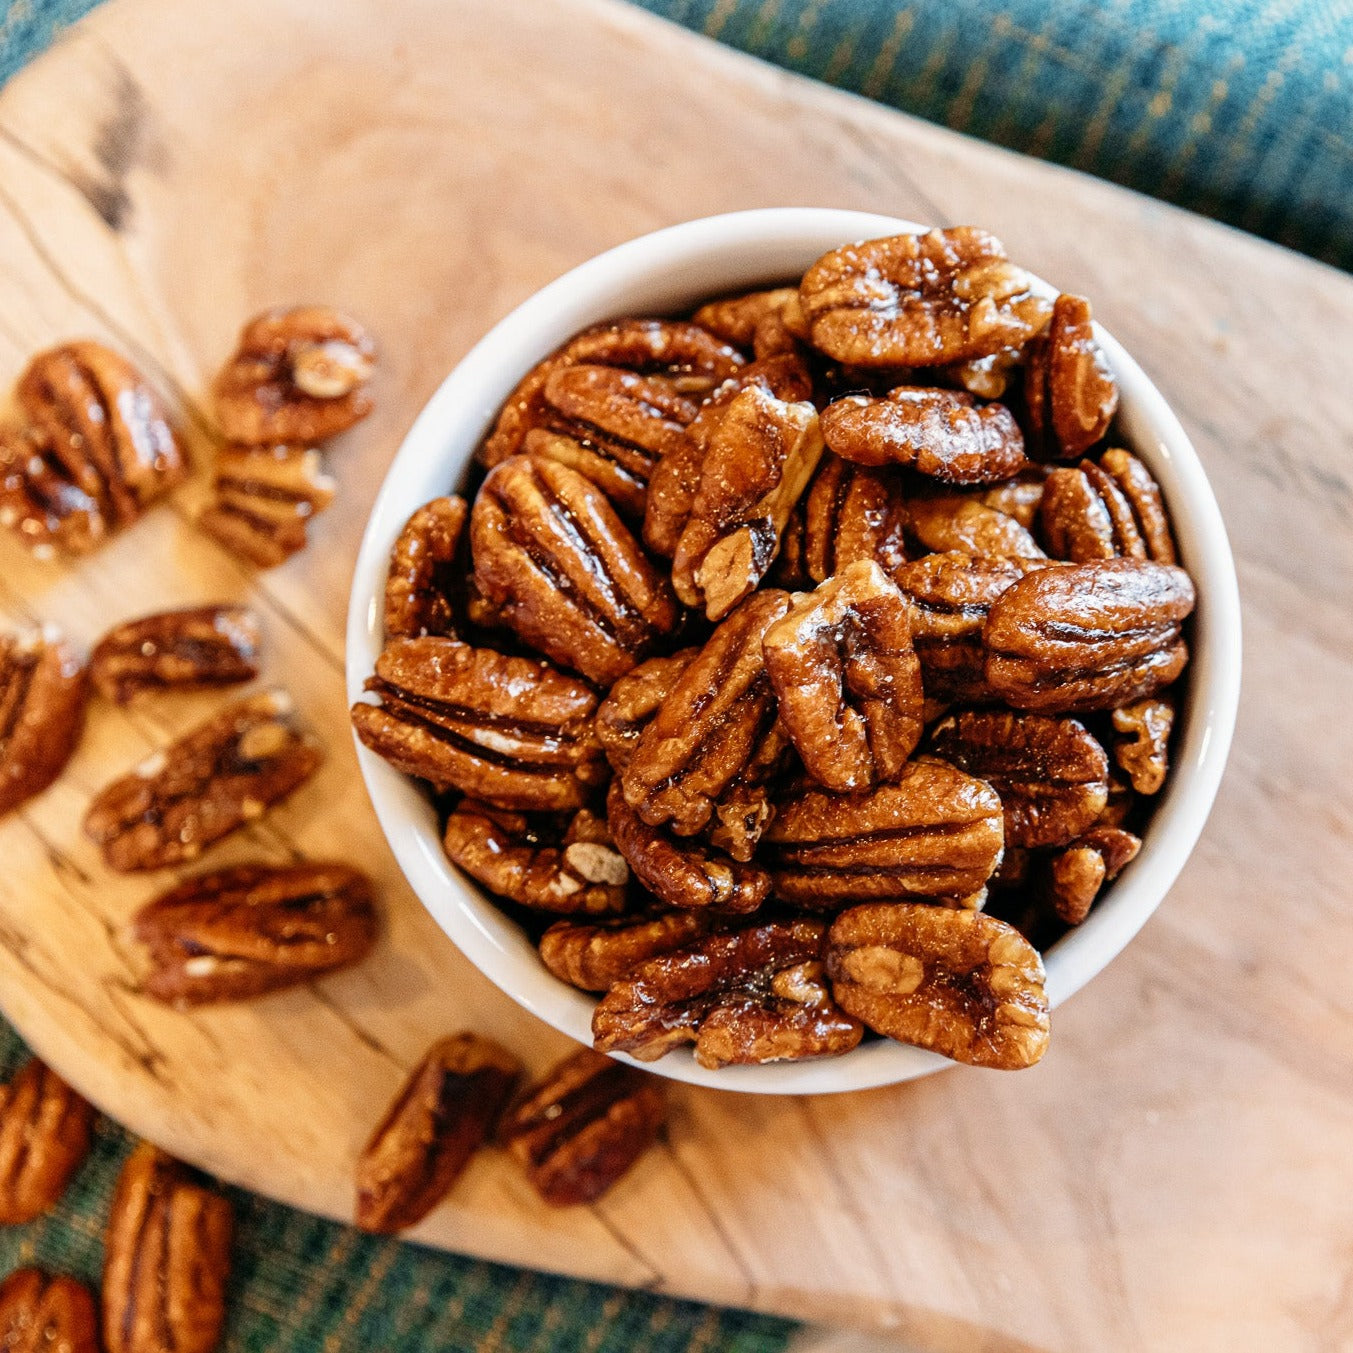 Candy coated pecan halves in white bowl on wooden board